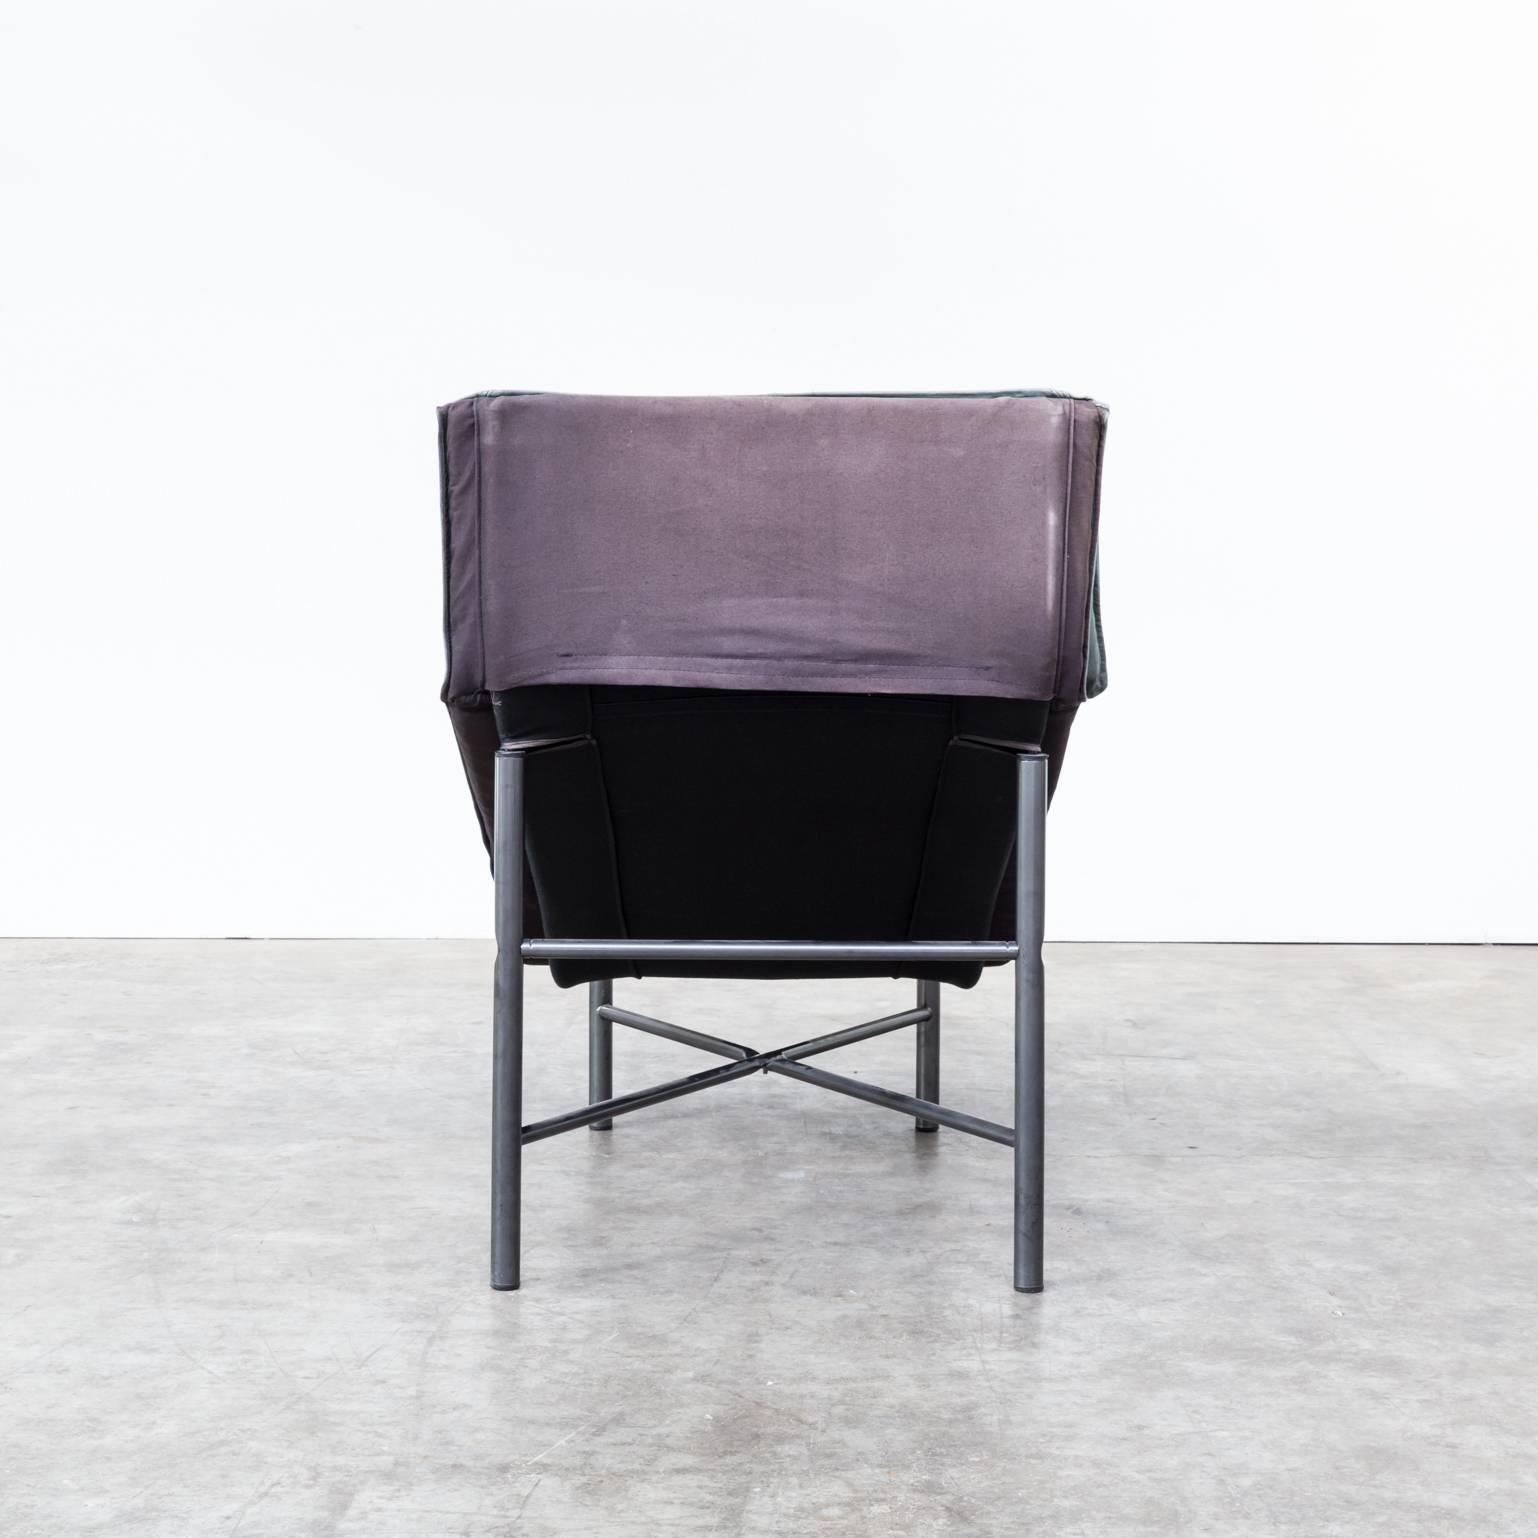 Swedish 1980s Tord Björklund ‘Skye’ Chaise Longue Chair Leather For Sale